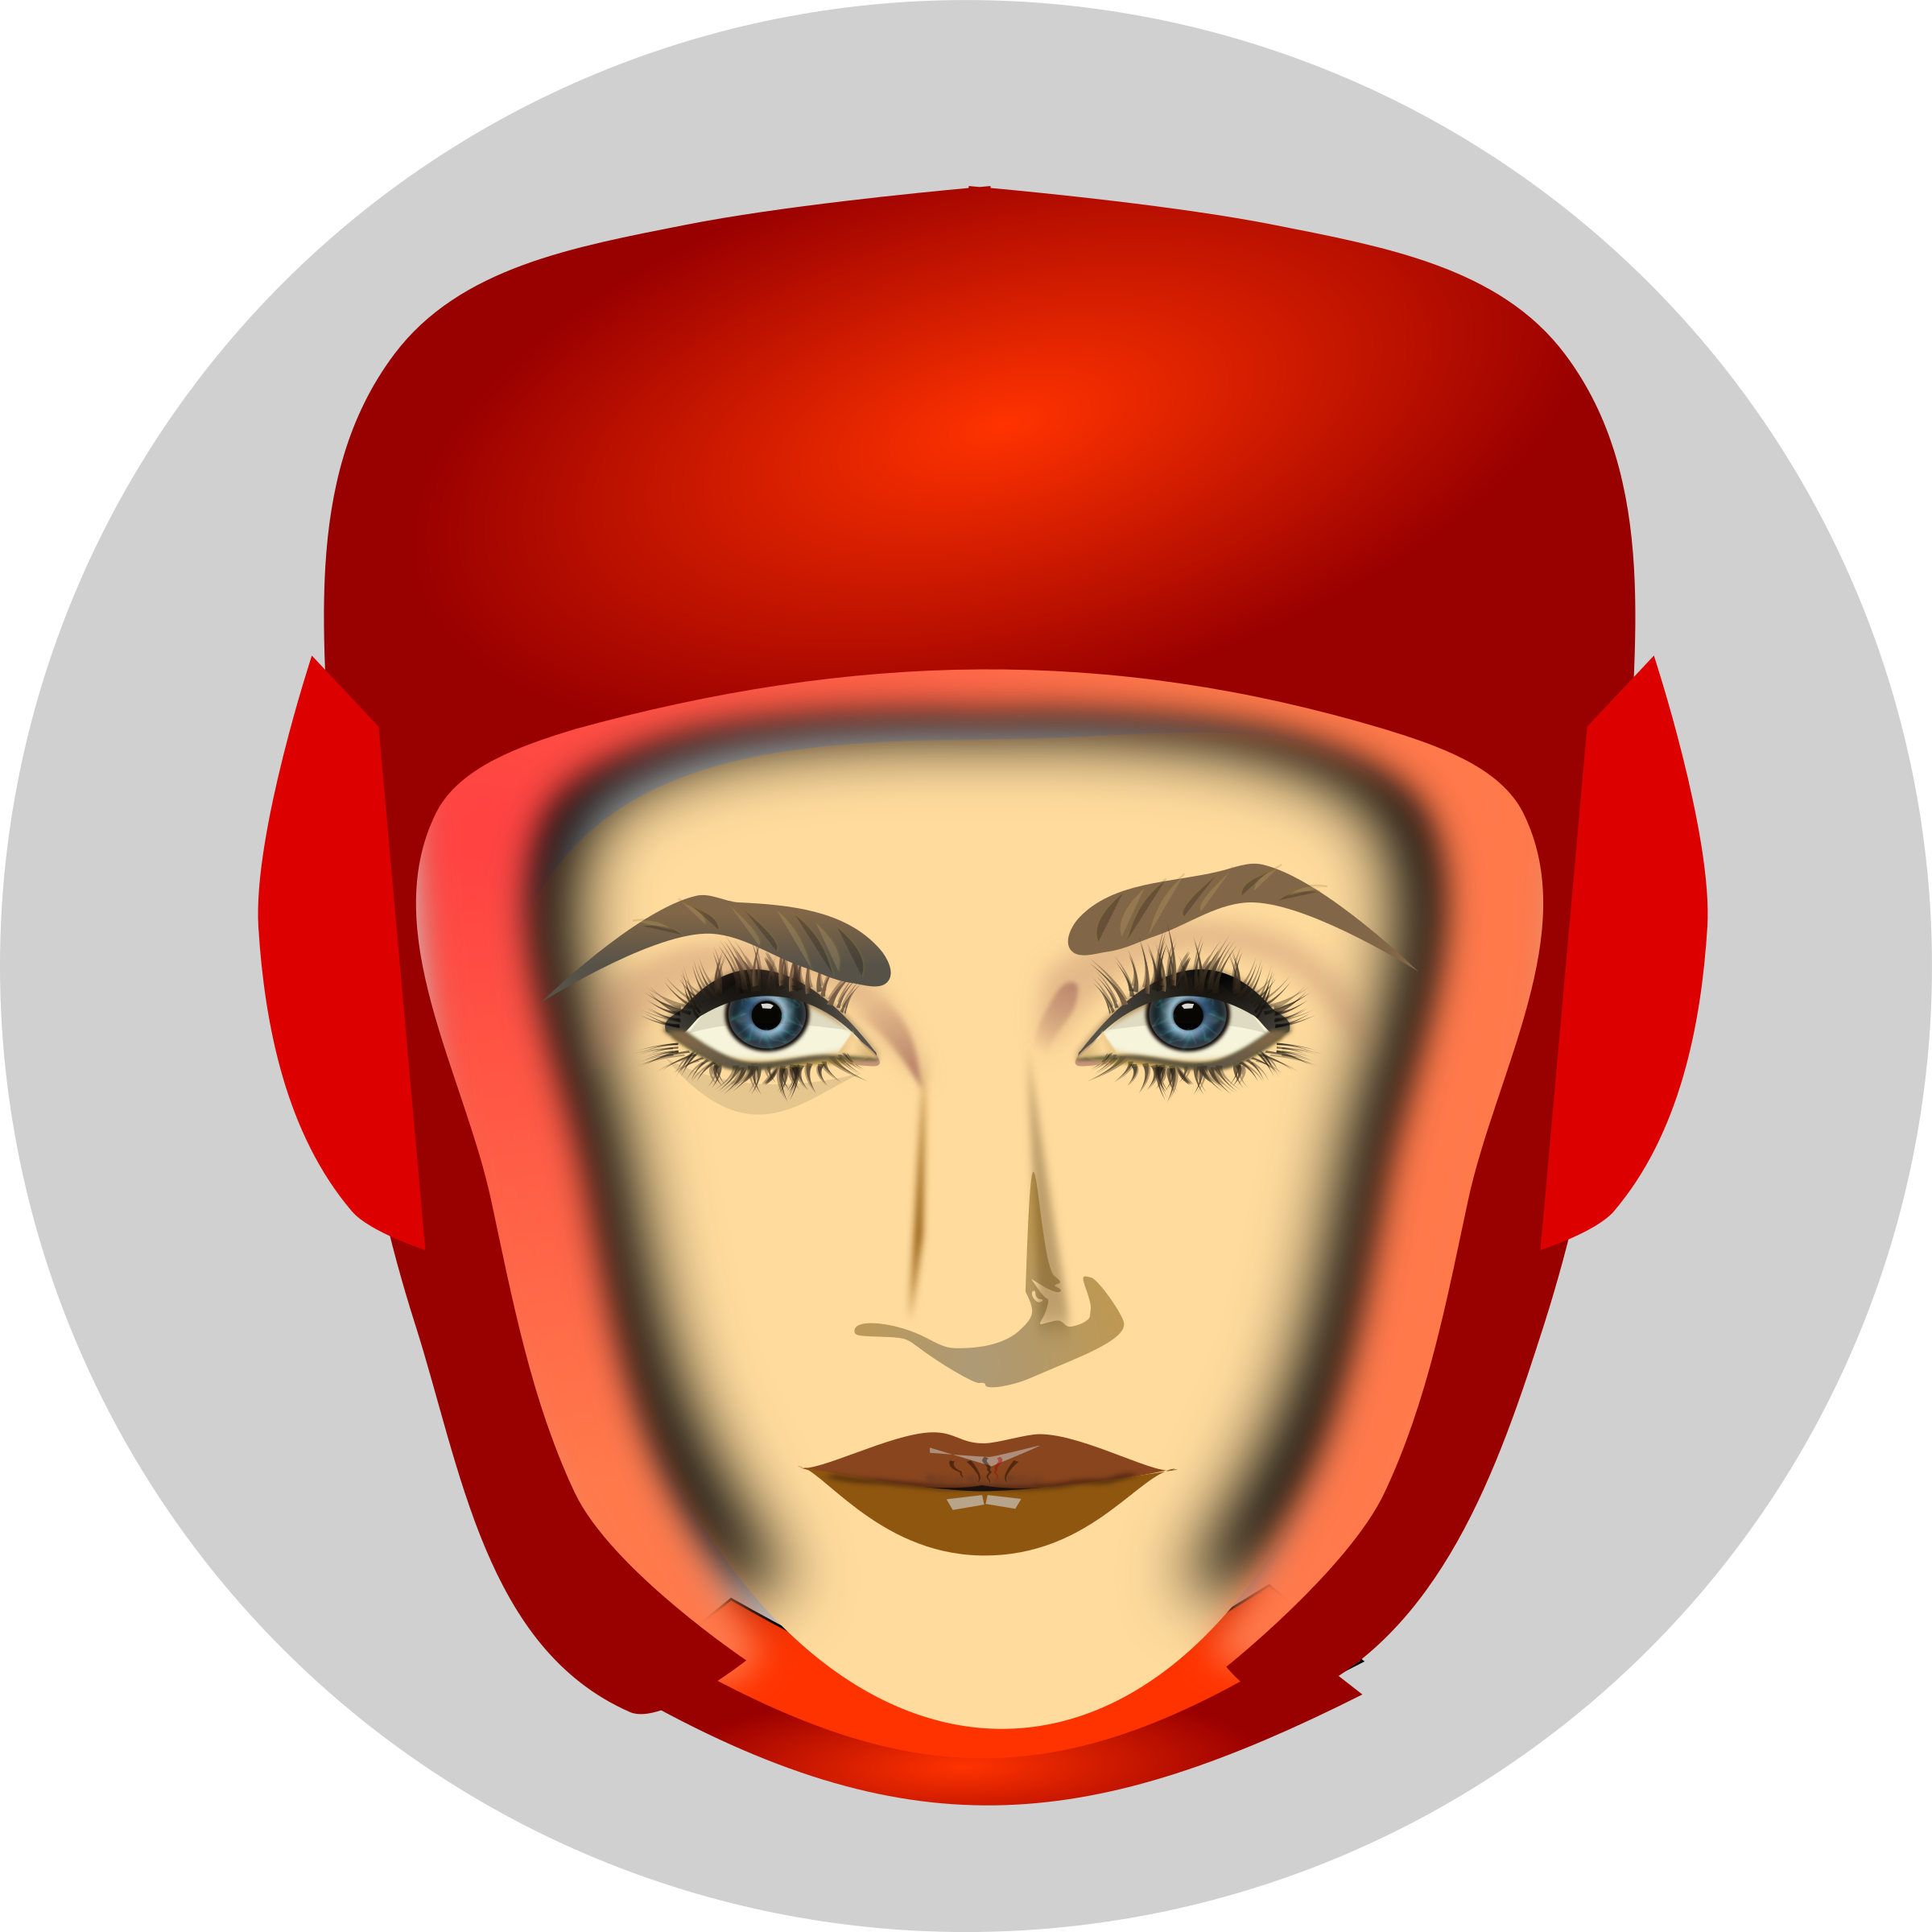 Woman, Boxer, Fighter, Boxing, Kung Fu, Fight, Hero - Girl In Boxing Helmet (2400x2400)